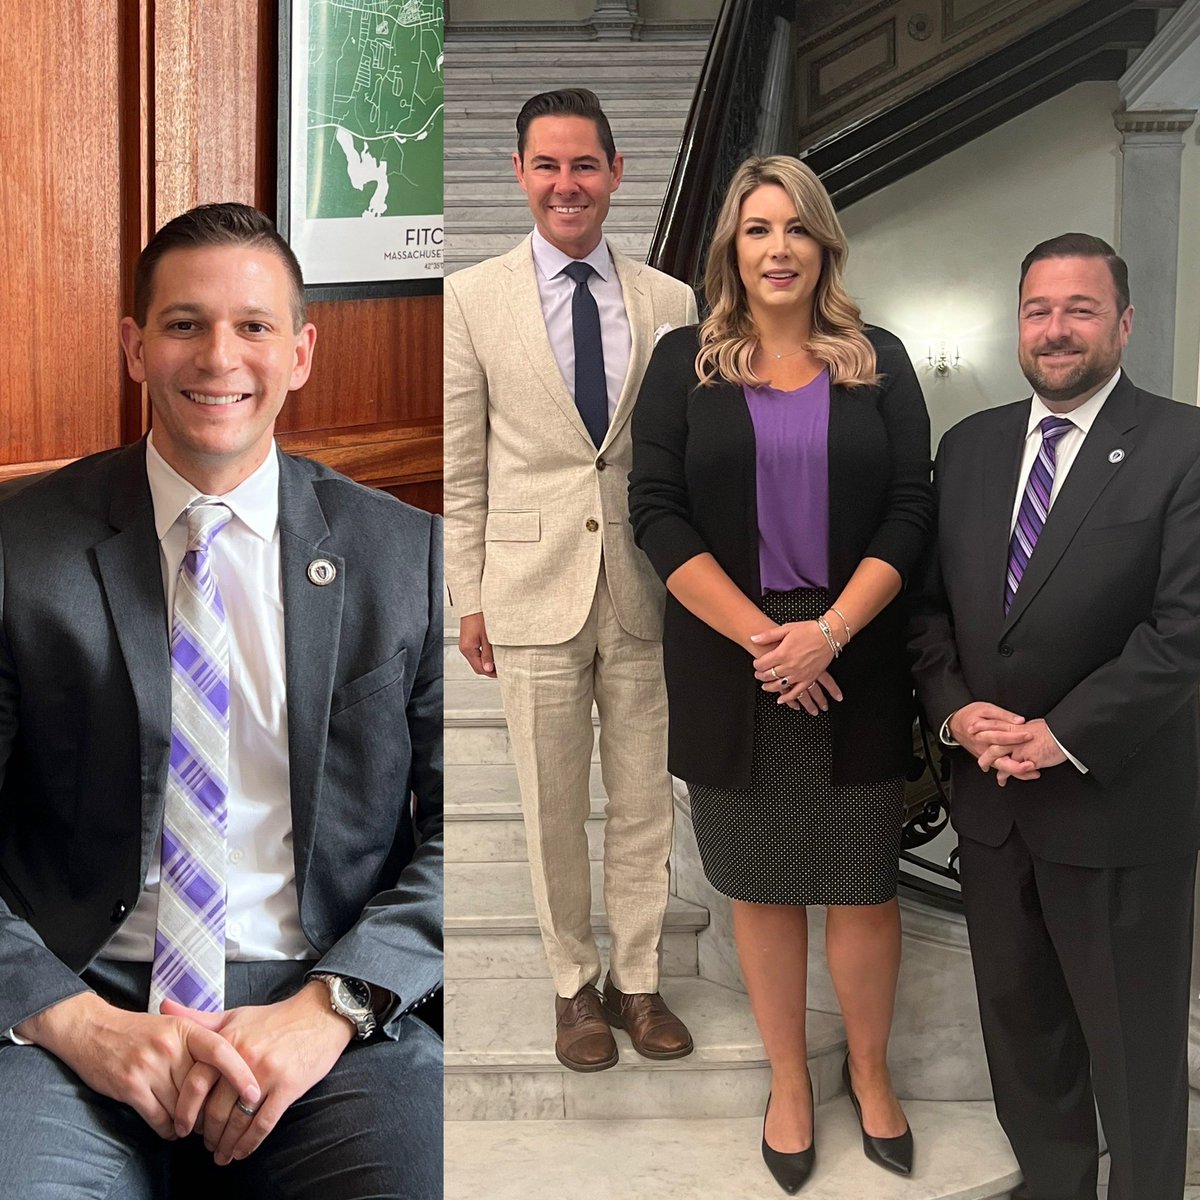 State Rep Mike Kushmerek, @JakeForSenate, @JessicaGiannino, & I are all wearing purple for World Elder Abuse Awareness Day. If you know of or suspect this is happening to someone you love, you can report any time at (800) 922-2275 or online at mass.gov/reporting-elde….